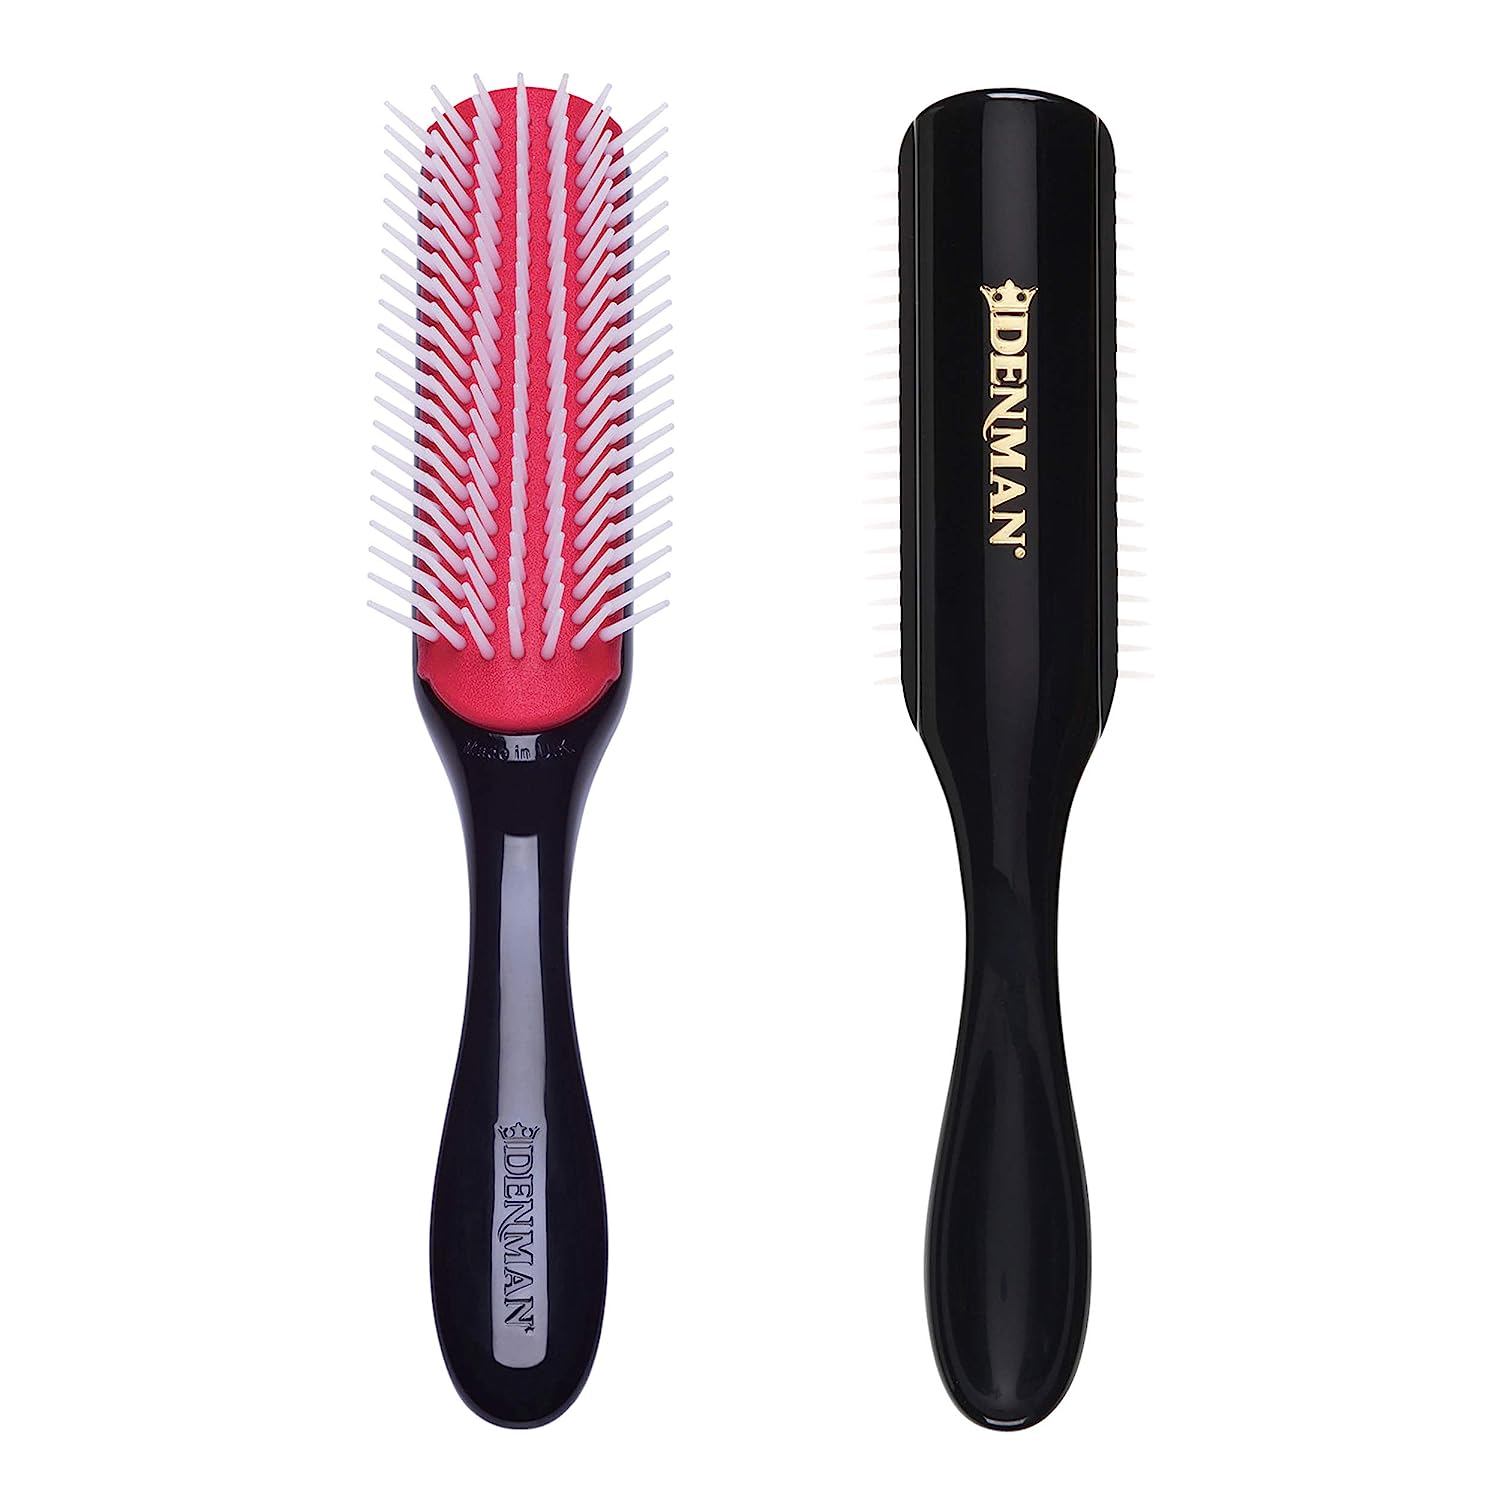 Denman Curly Hair Brush D3 (Black & Red) 7 Row Styling [...]